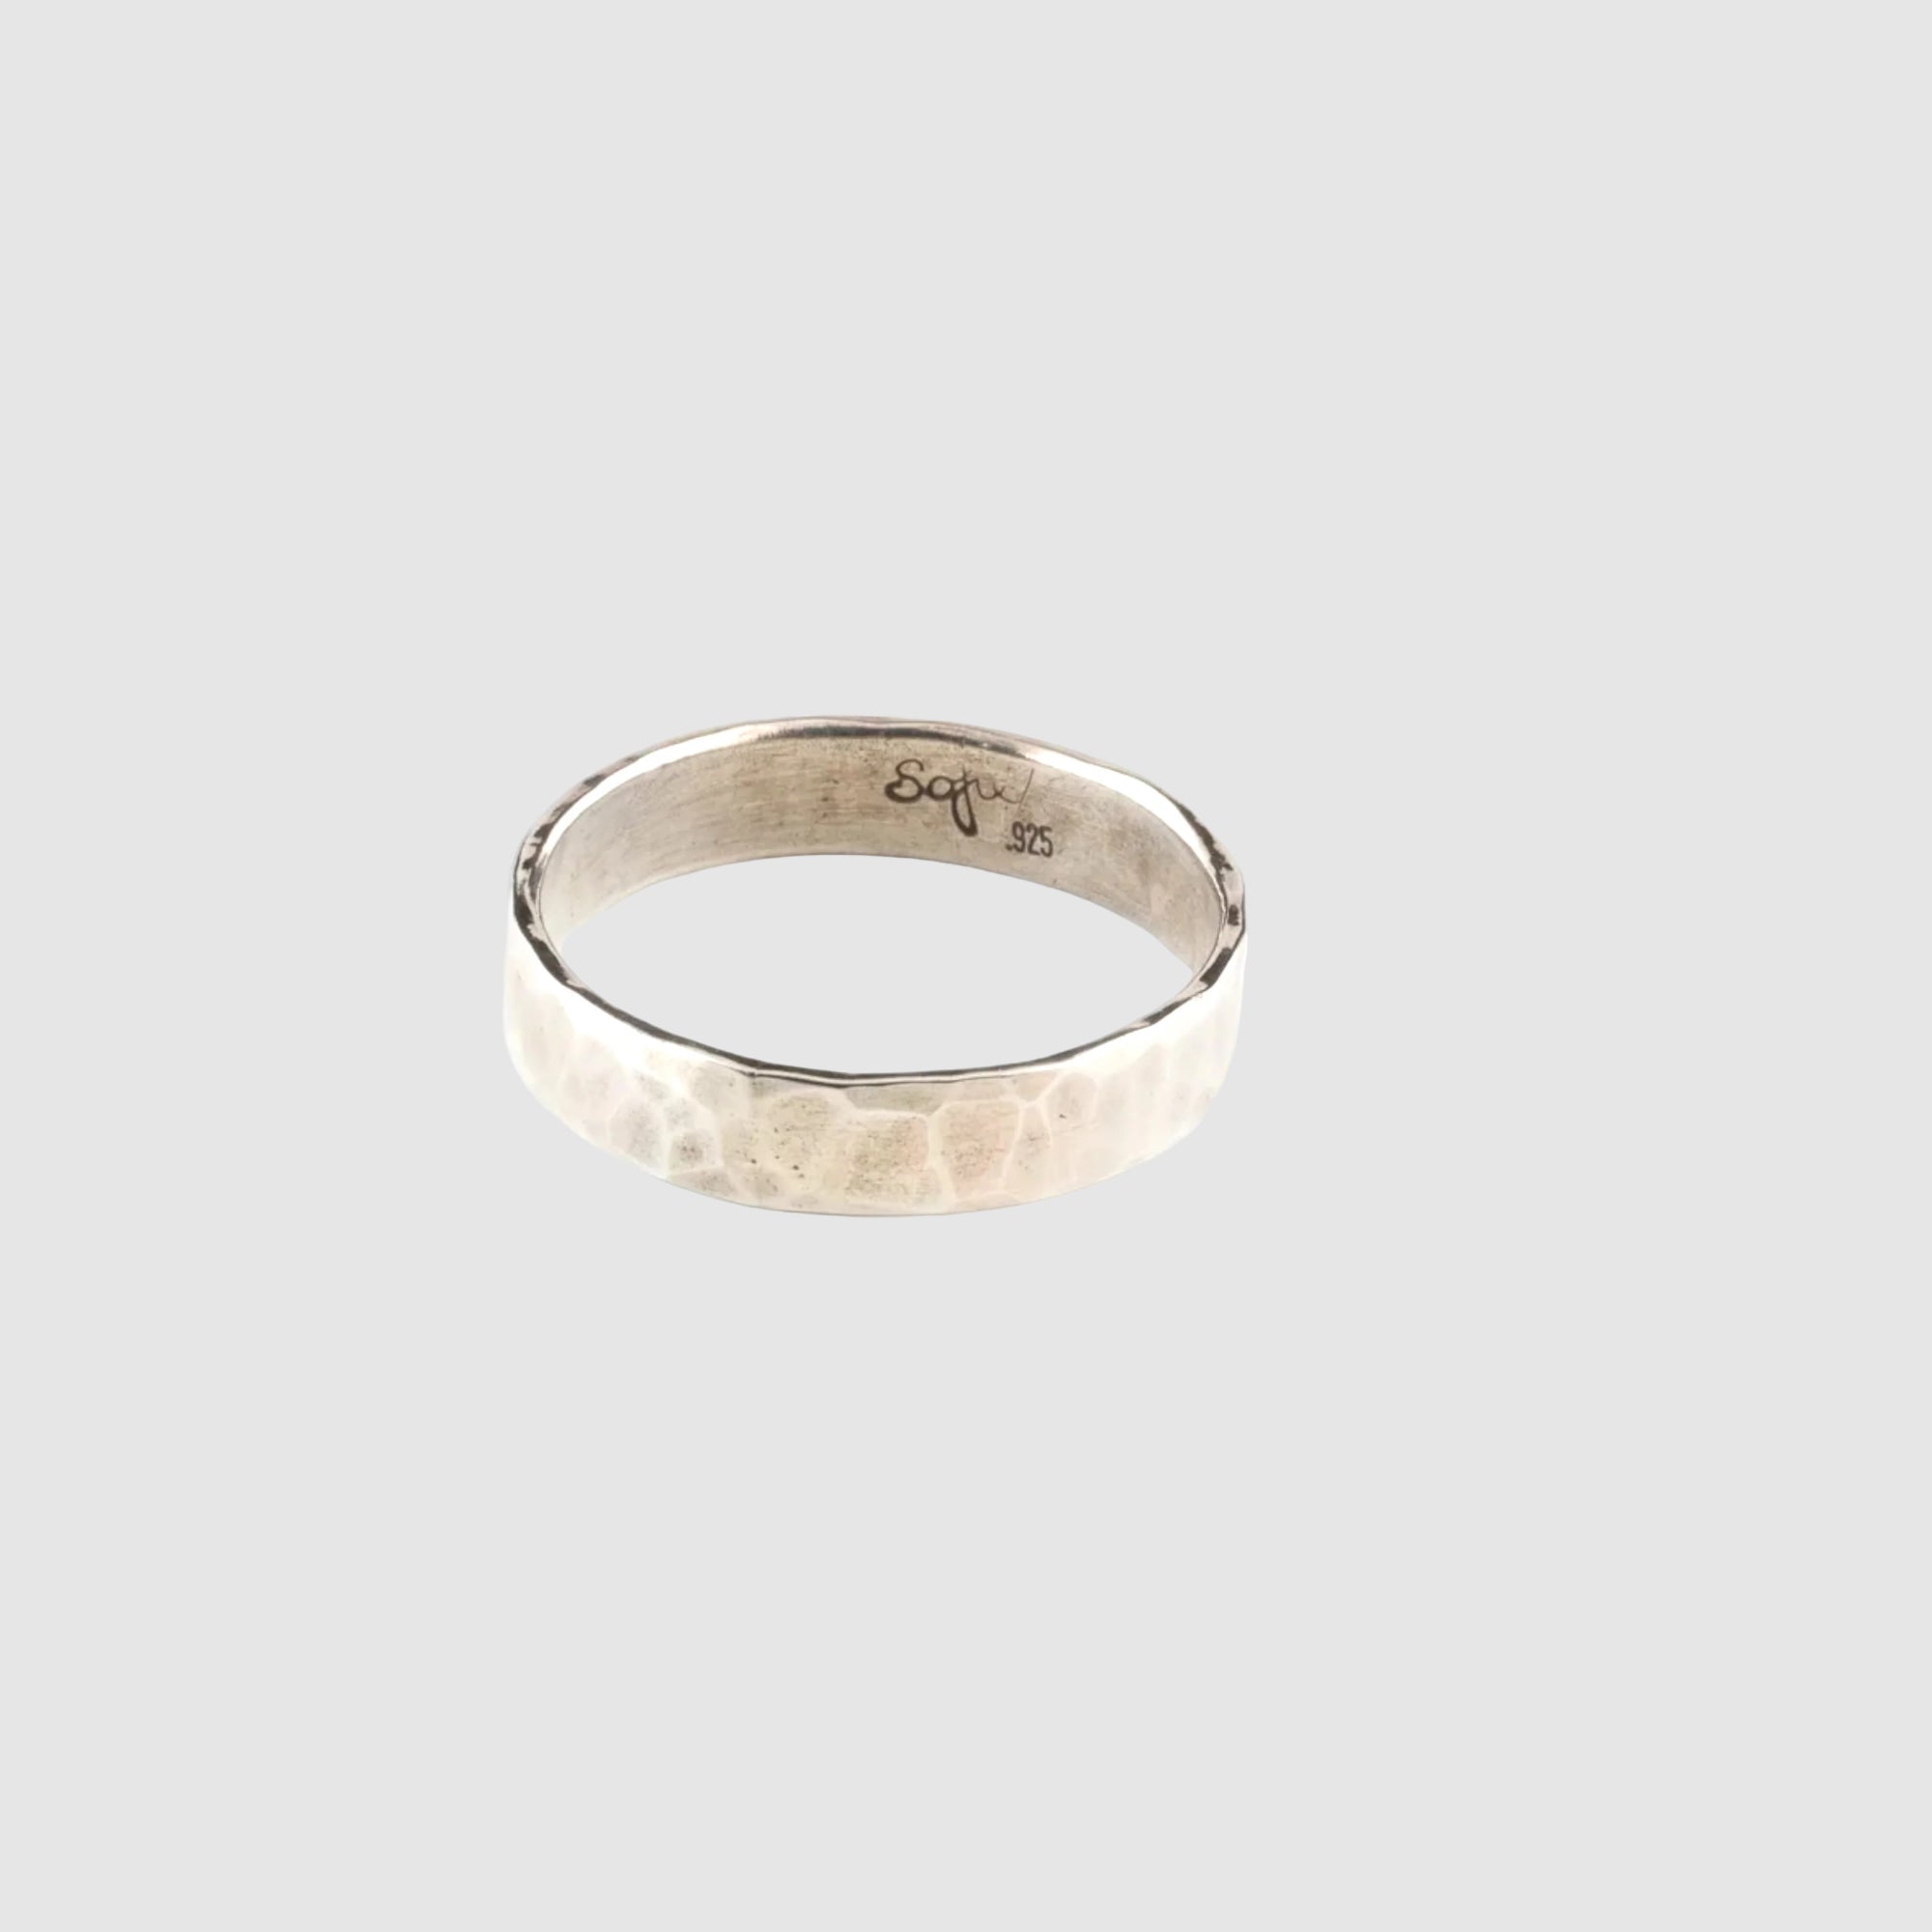 HAND HAMMERED STERLING SILVER BAND